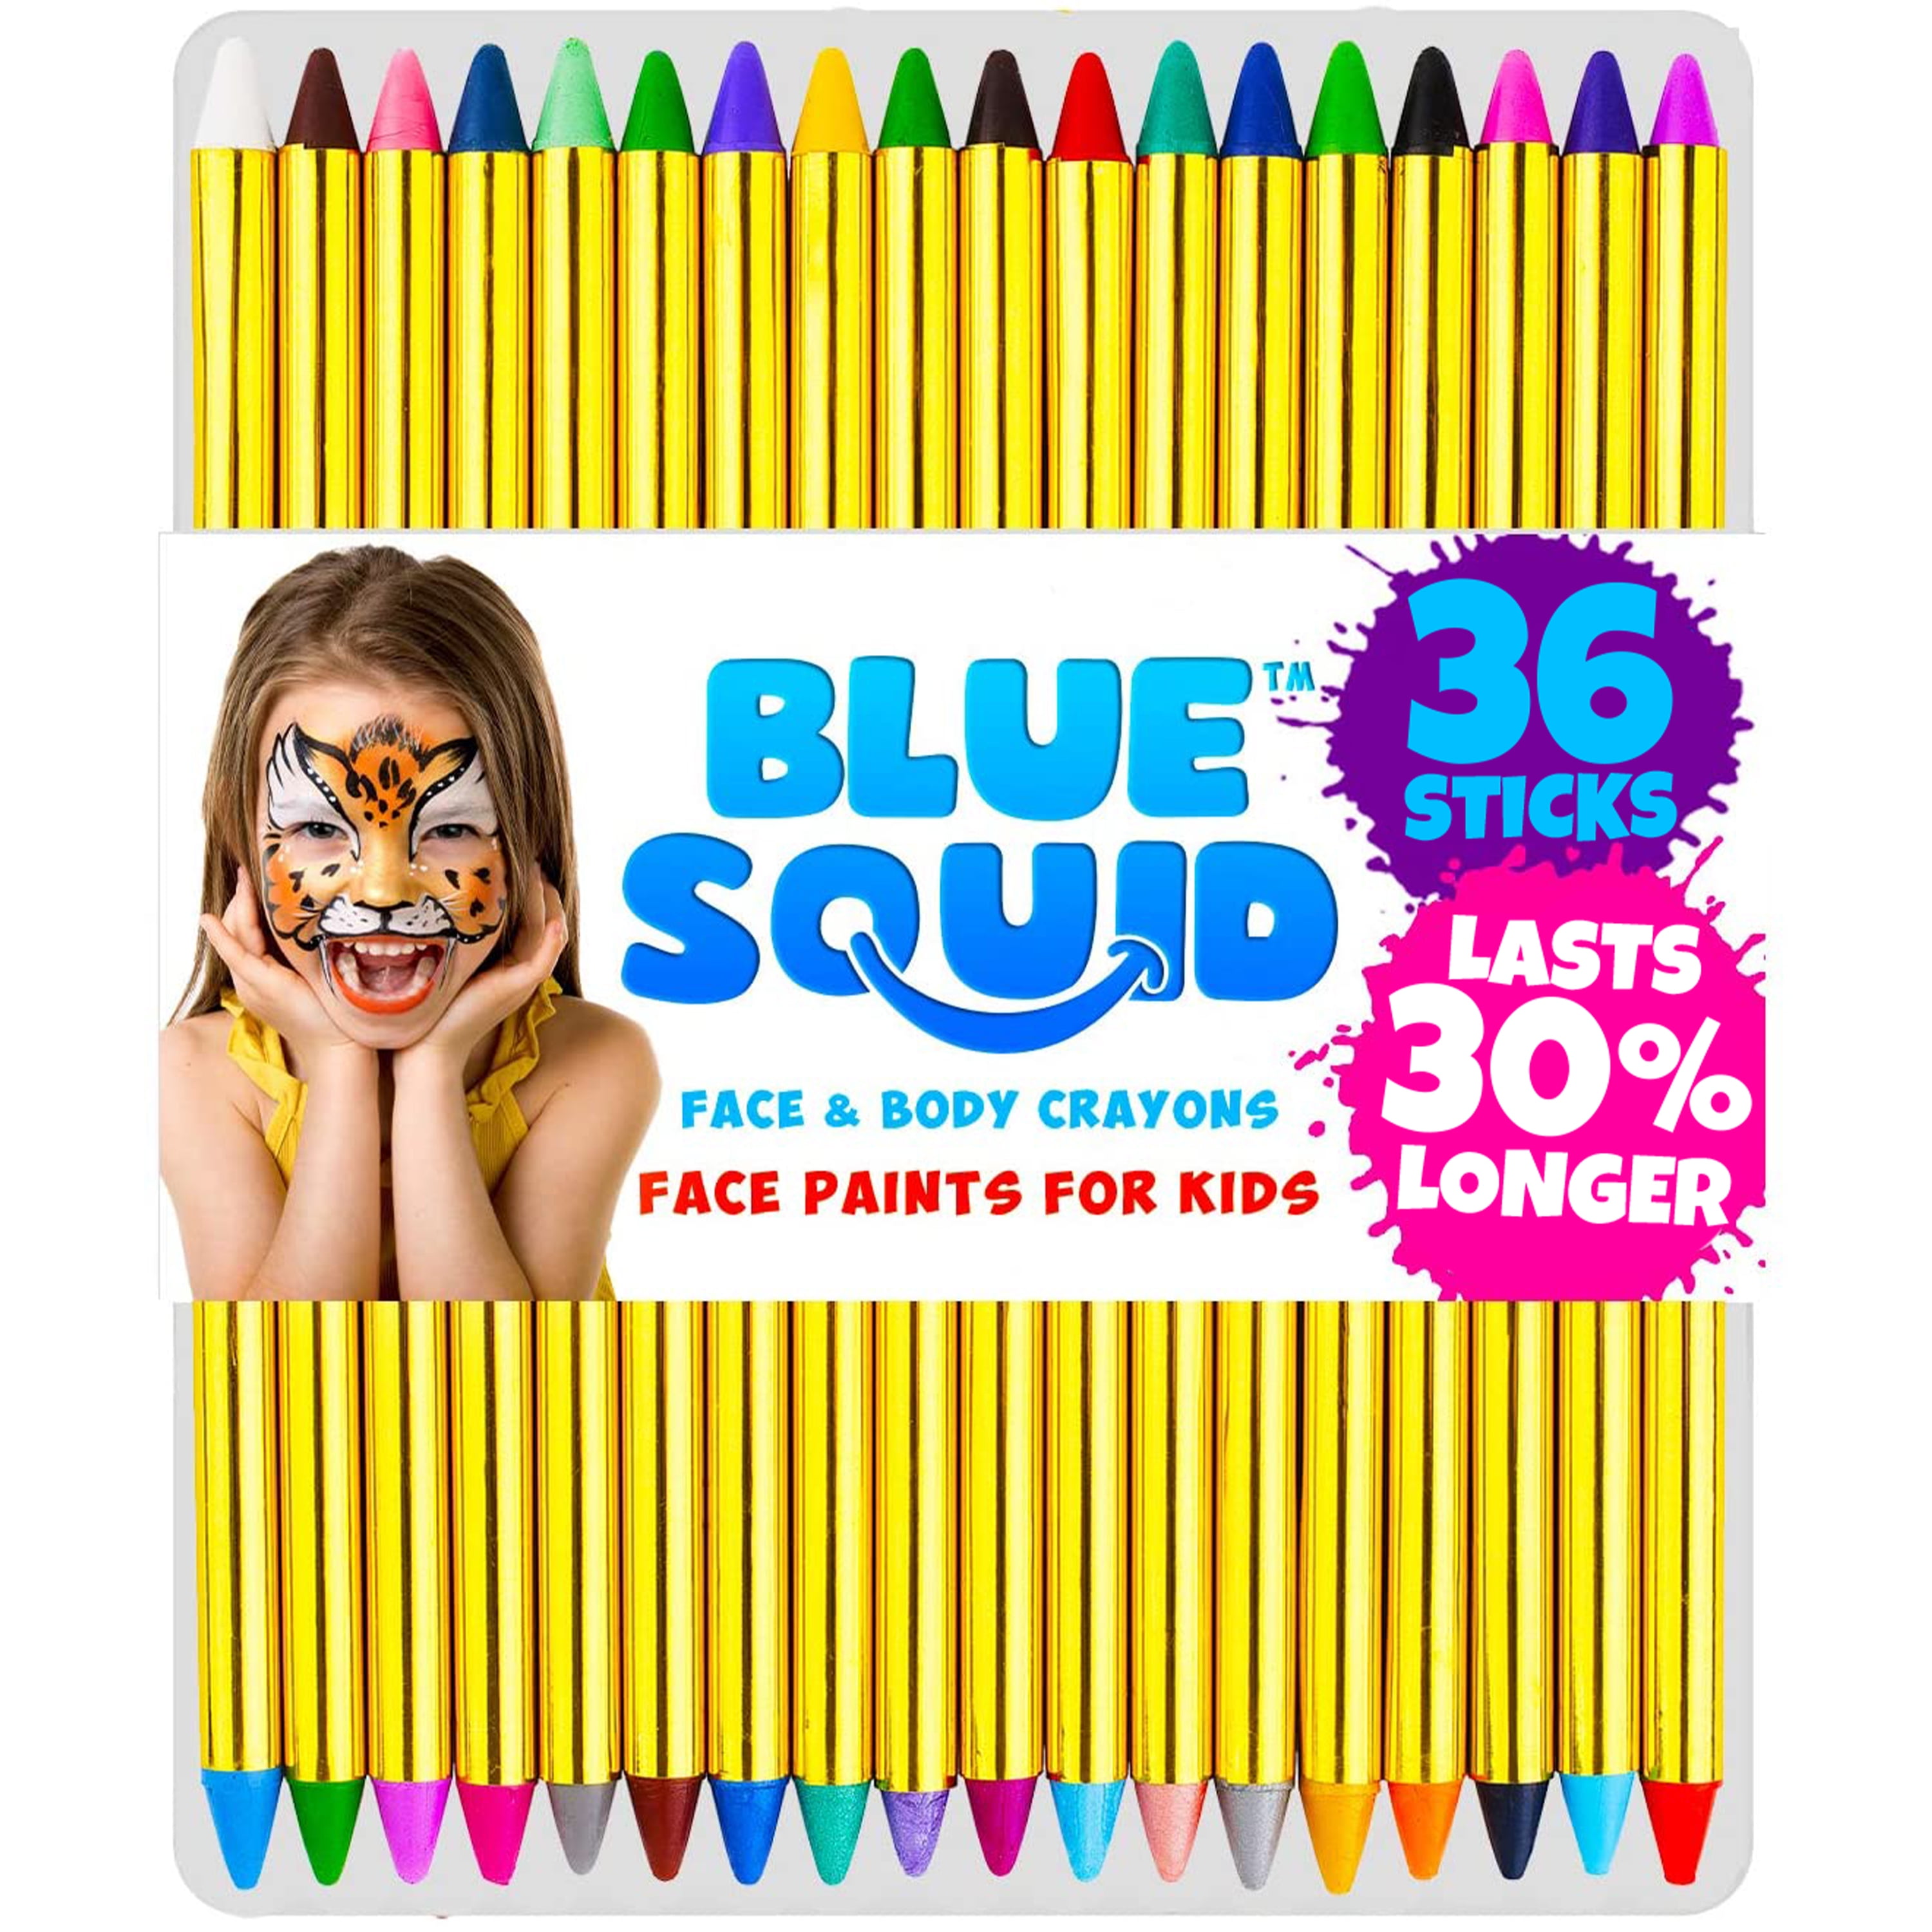 Blue Squid Kids Face Paint Makeup Crayons for Face and Body Skin